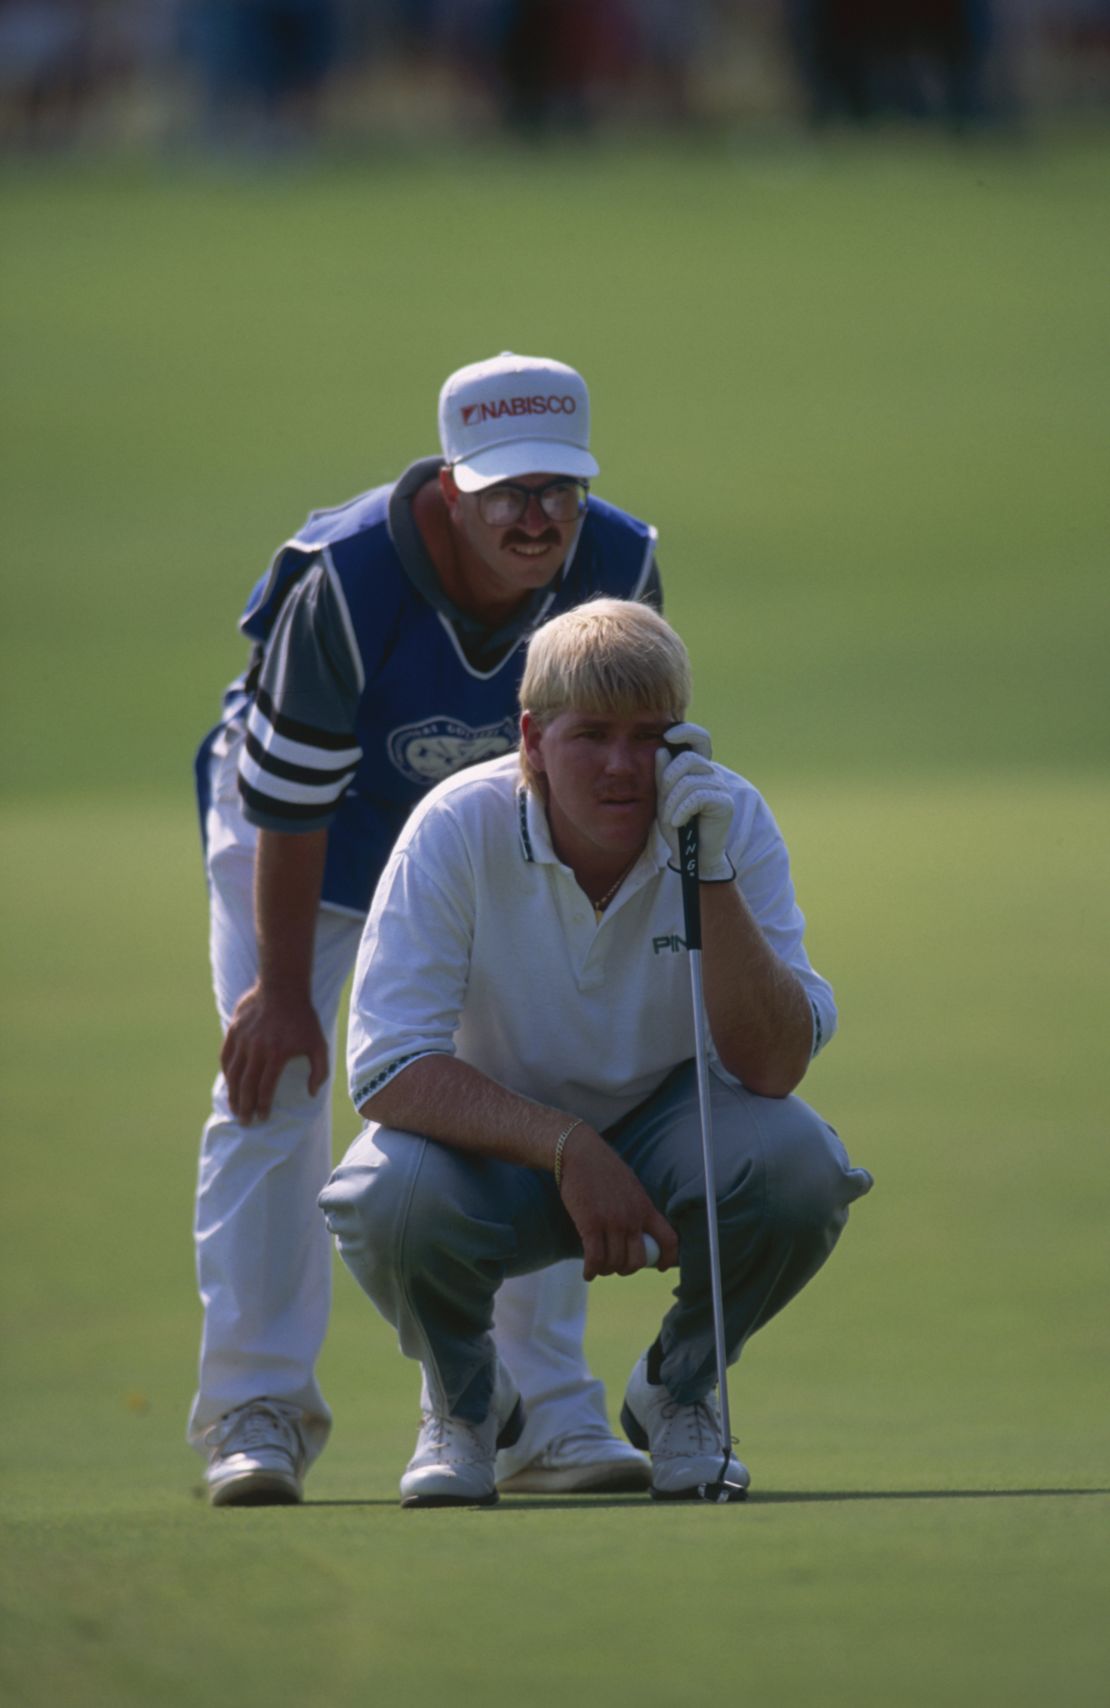 Daly paired with Medlin, Price's caddie, for the tournament.